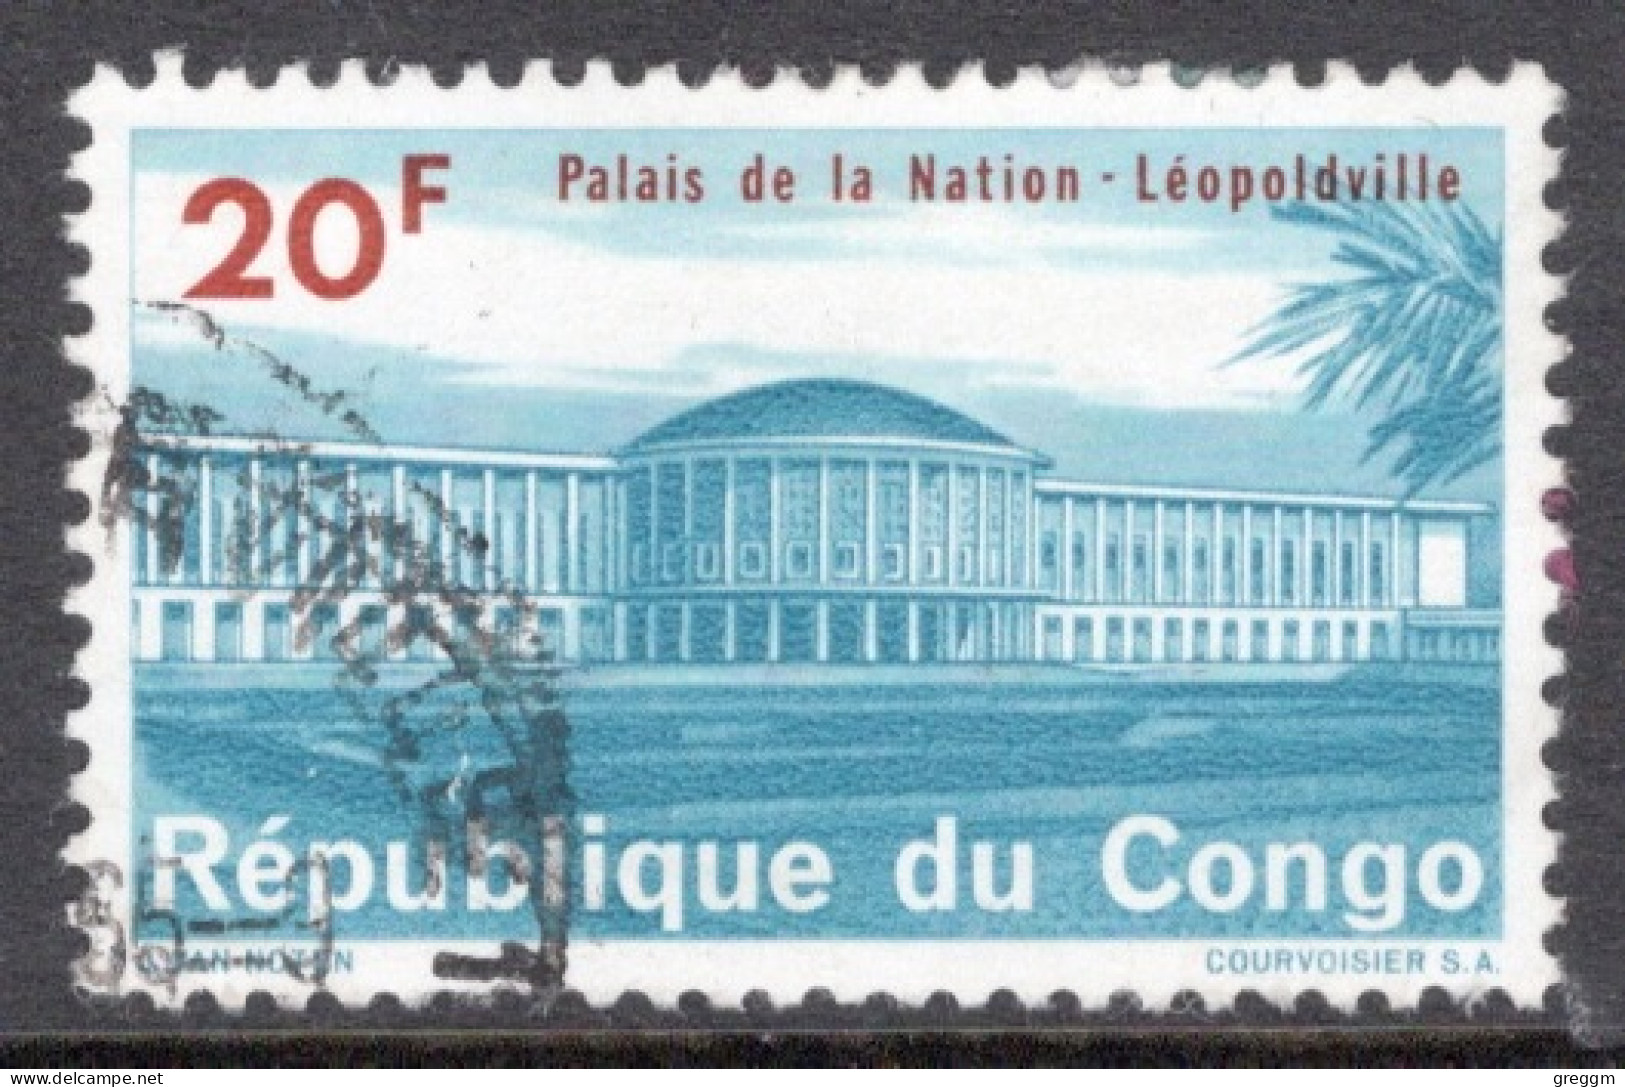 Kinshasa Congo 1964 Single 20f Stamp From The Definitive Set  National Palace, Leopoldville  In Fine Used. - Usati